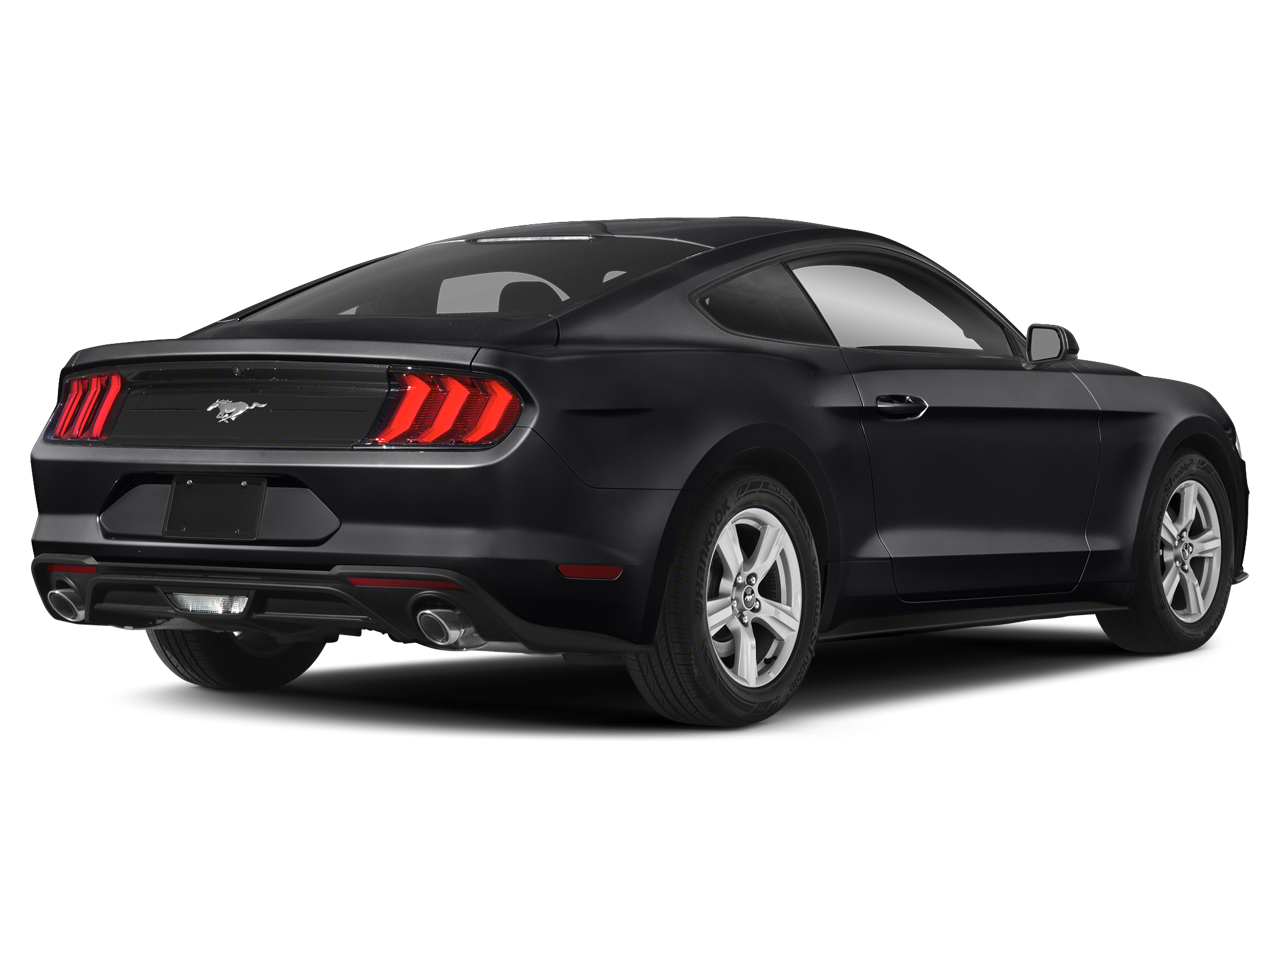 2019 Ford Mustang EcoBoost in Newnan, GA - Shared Inventory - Newnan Peachtree Chrysler Dodge Jeep Ram